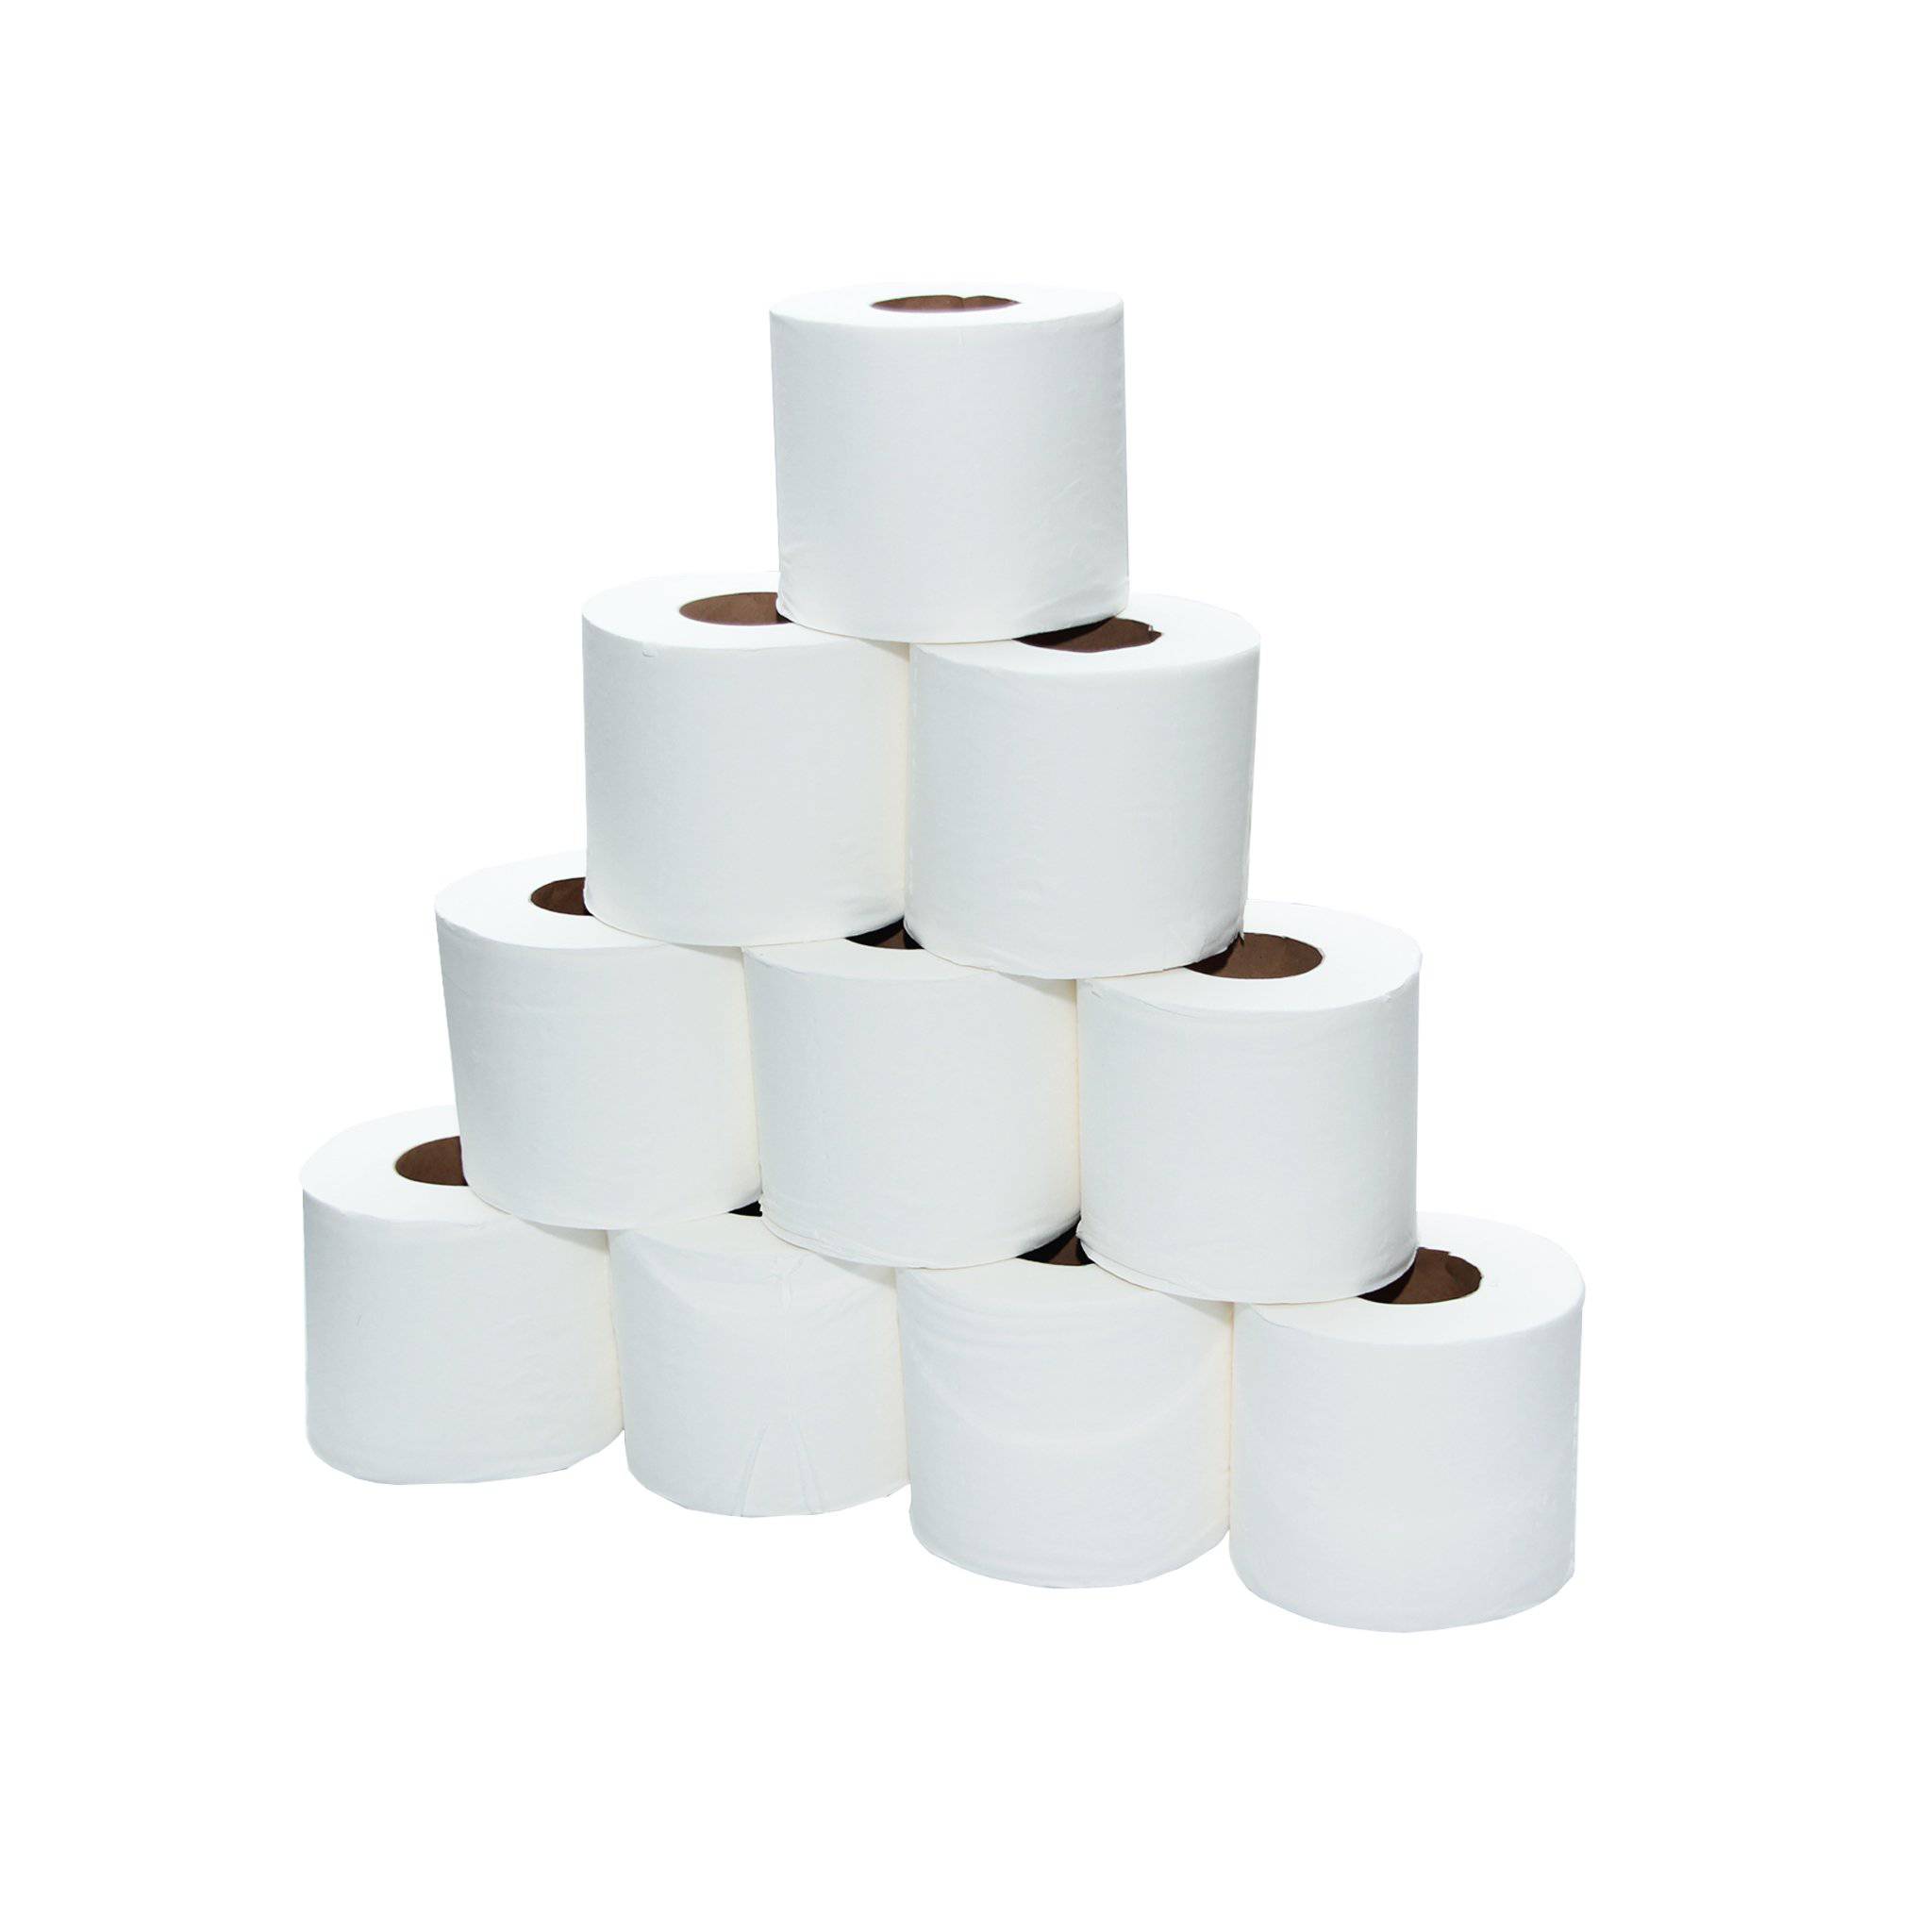 200 Sheets 10 Roll X 10 Packets Soft N Cool Toilet Tissues Rolls 2 Ply